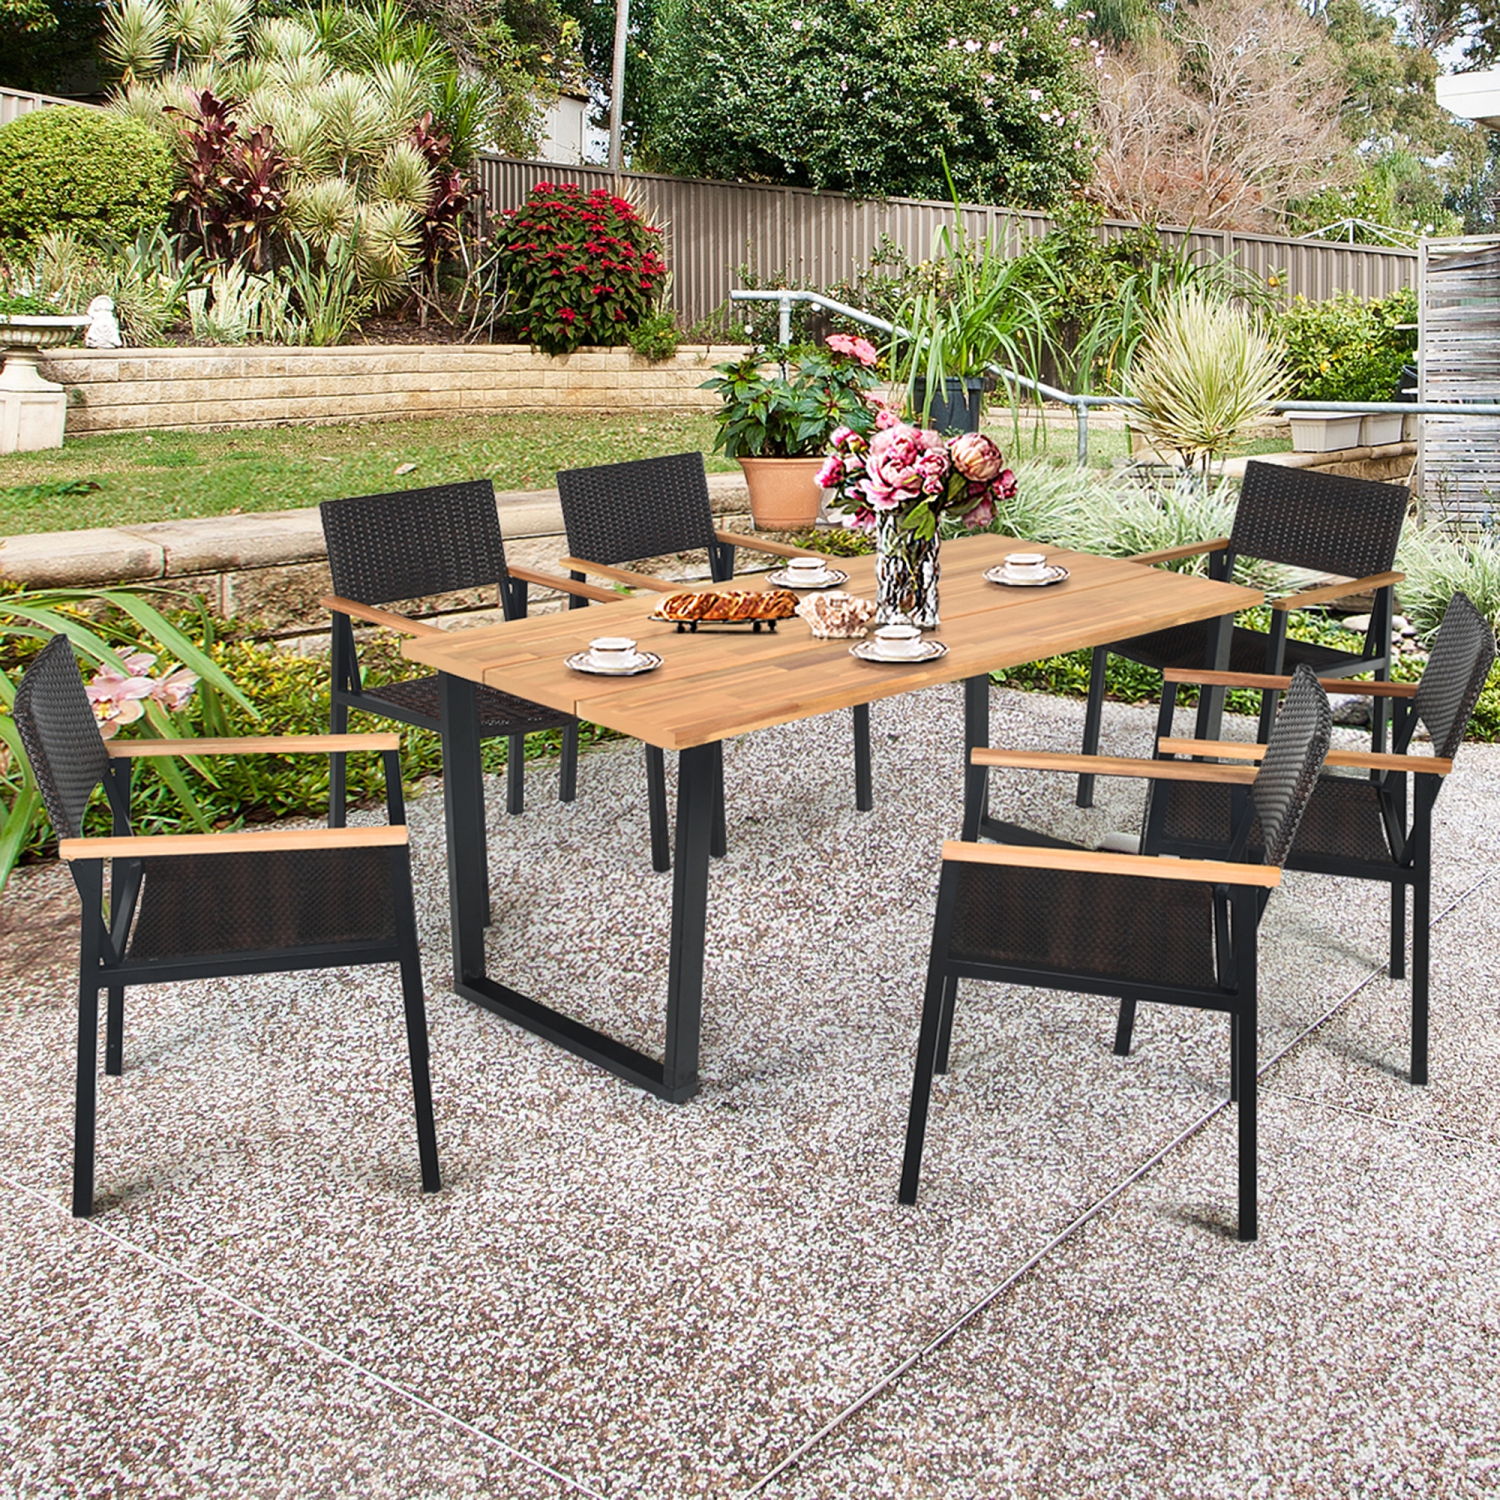 Gymax Patented 7PCS Patio Garden Dining Set Outdoor Dining Furniture Set w/ Umbrella Hole